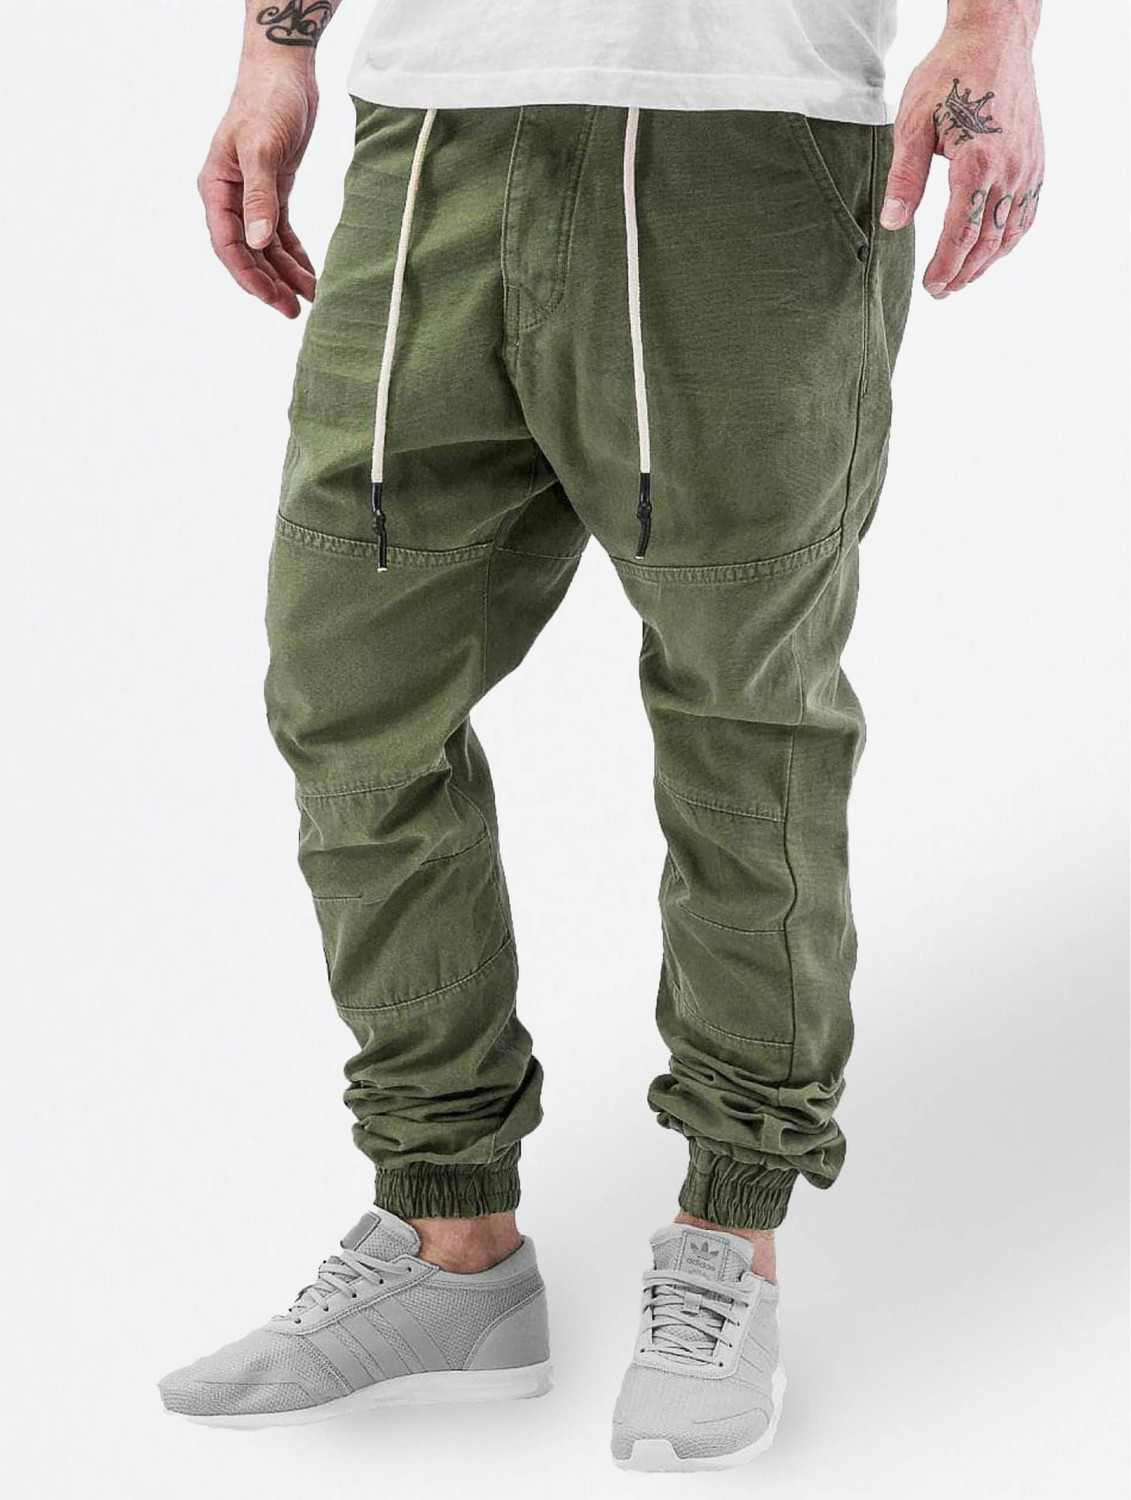 Börge Chino Jeans Olive